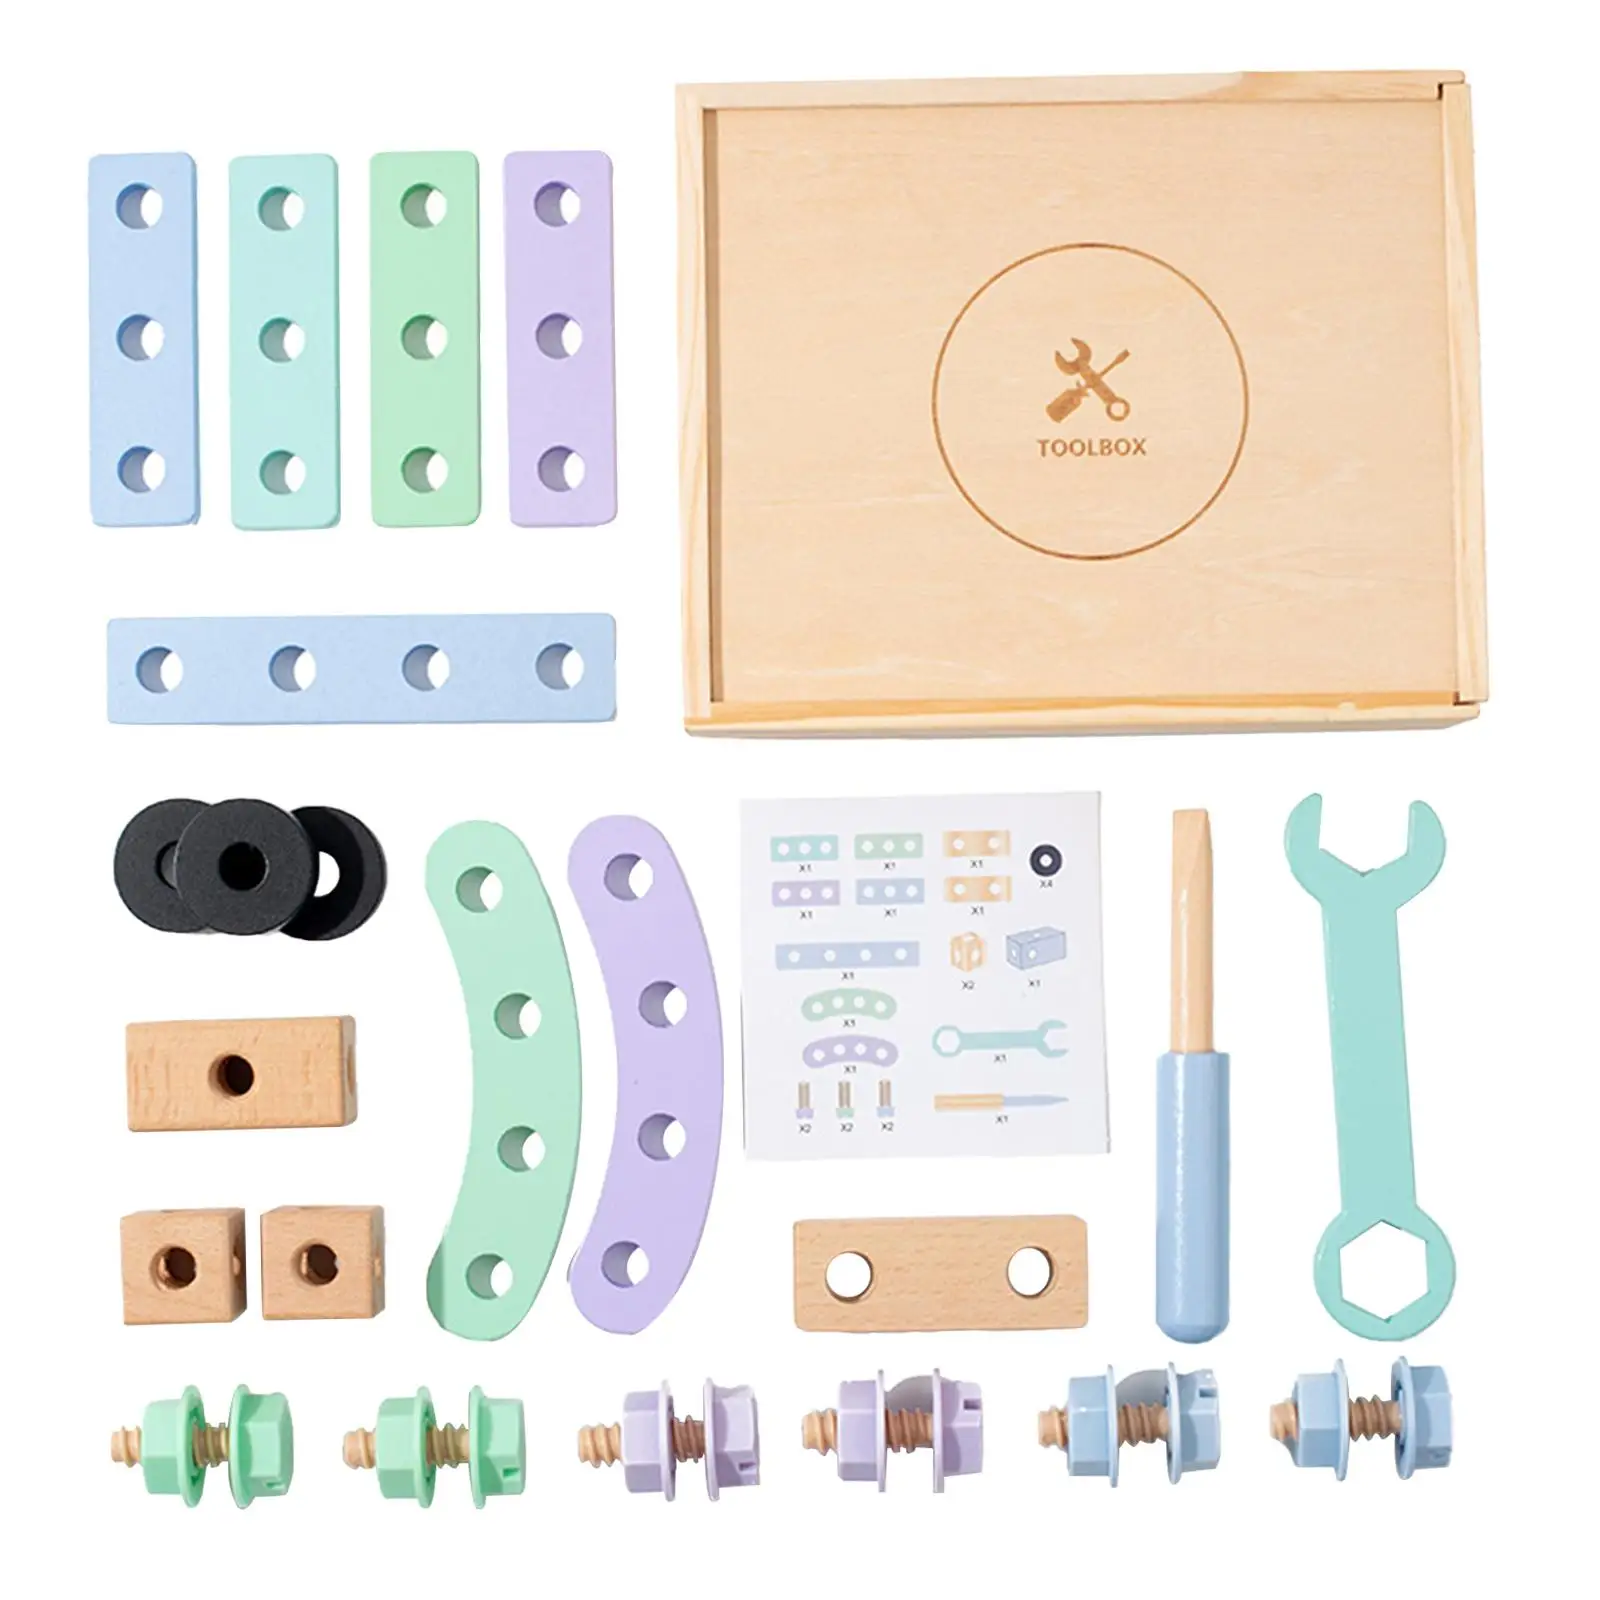 Wooden Repair Tool Box Toy DIY Multifunctional Creative Birthday Gifts Stem Learning Toys Montessori for Children Teens